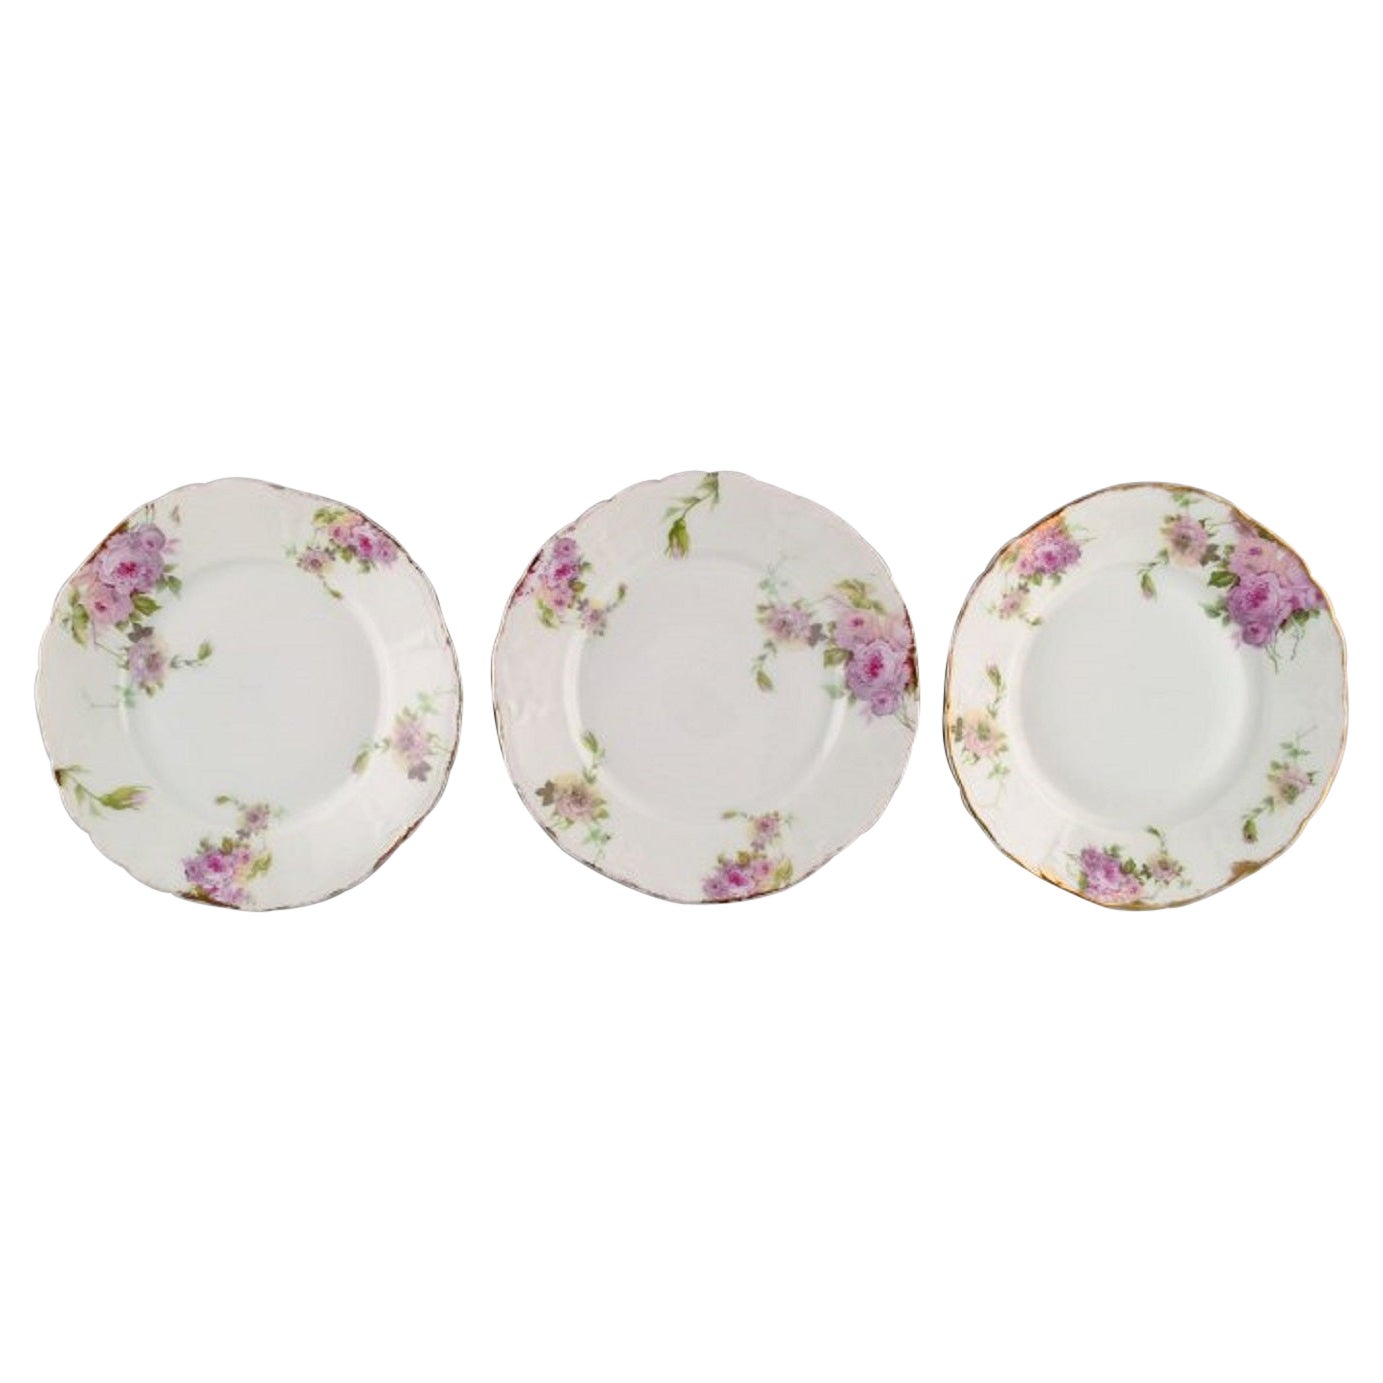 Rosenthal, Germany, Three Iris Plates in Hand-Painted Porcelain with Flowers For Sale